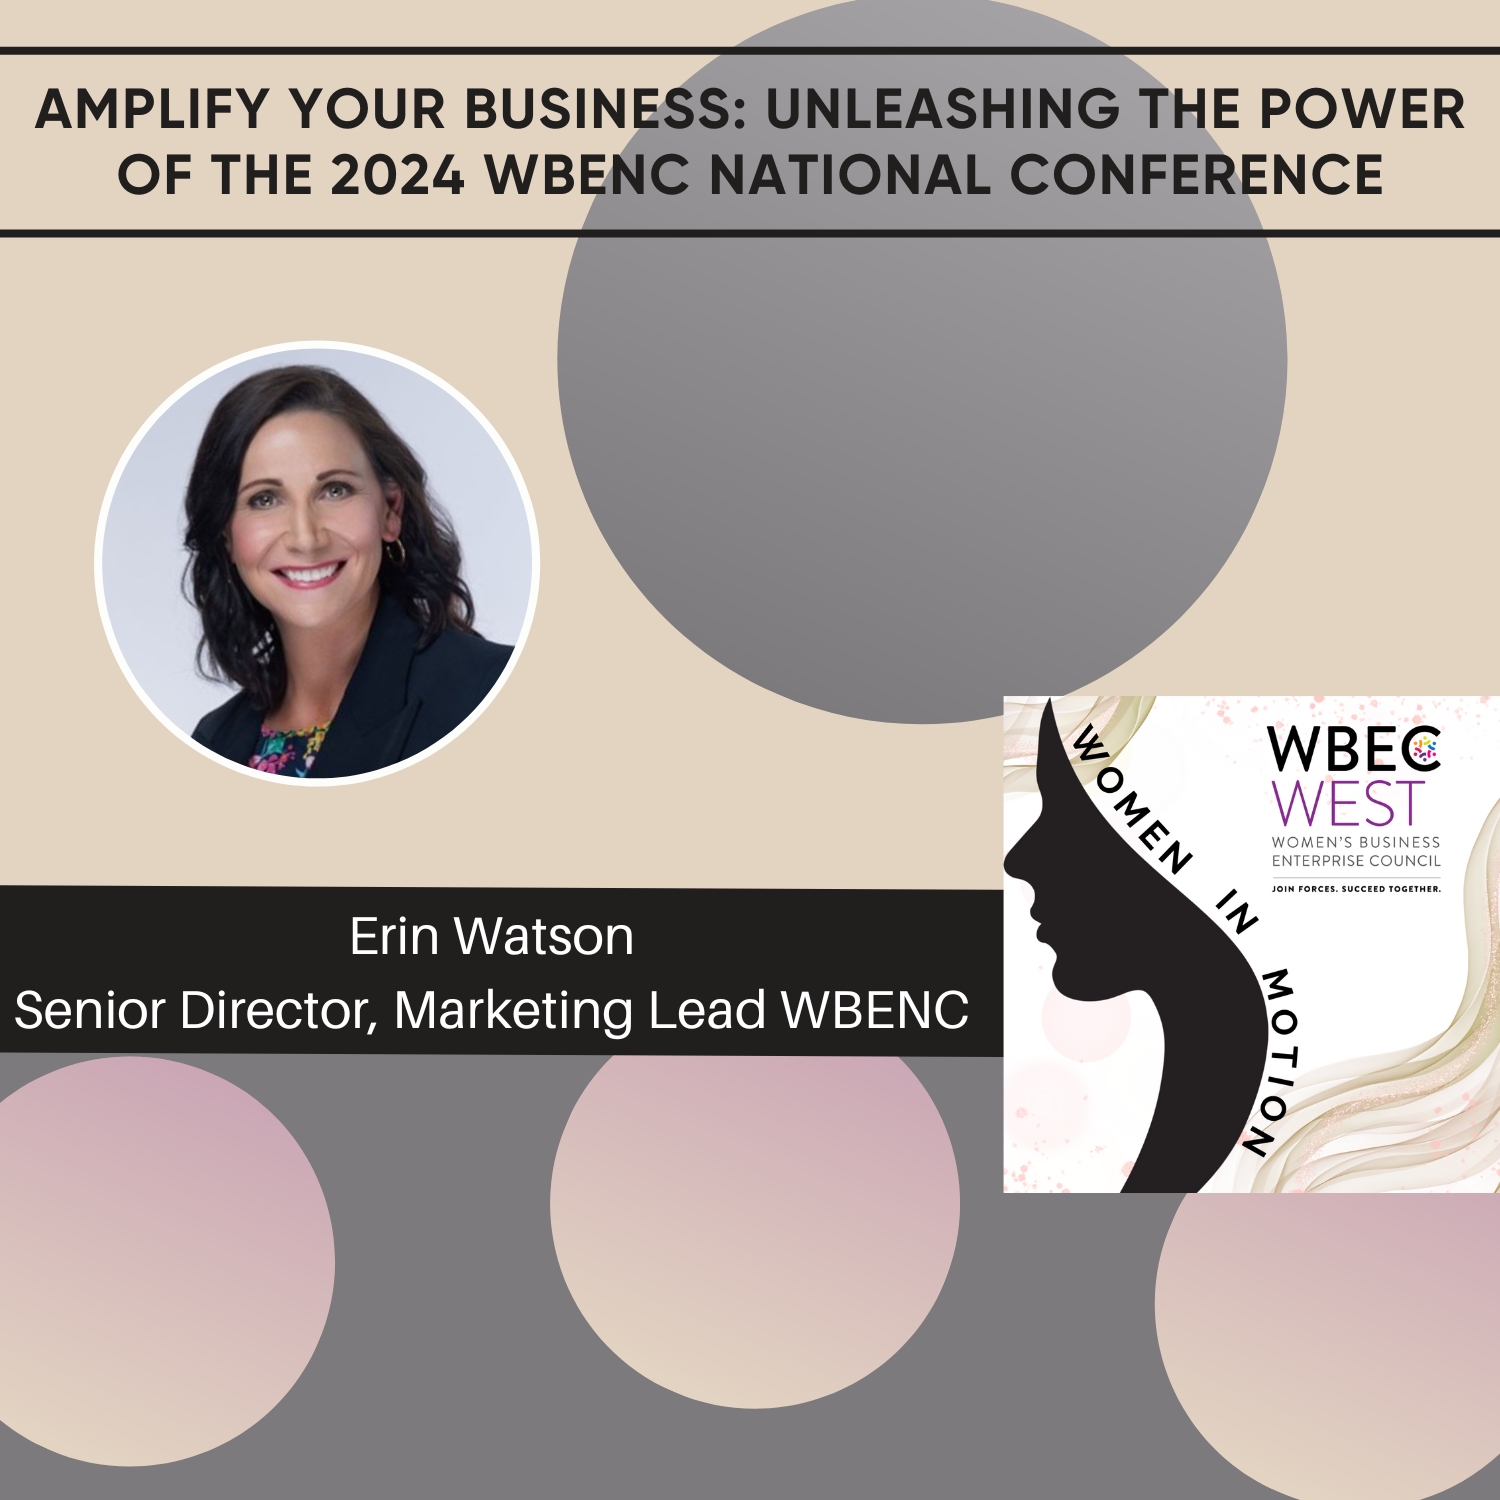 Amplify Your Business Unleashing the Power of the 2024 WBENC National